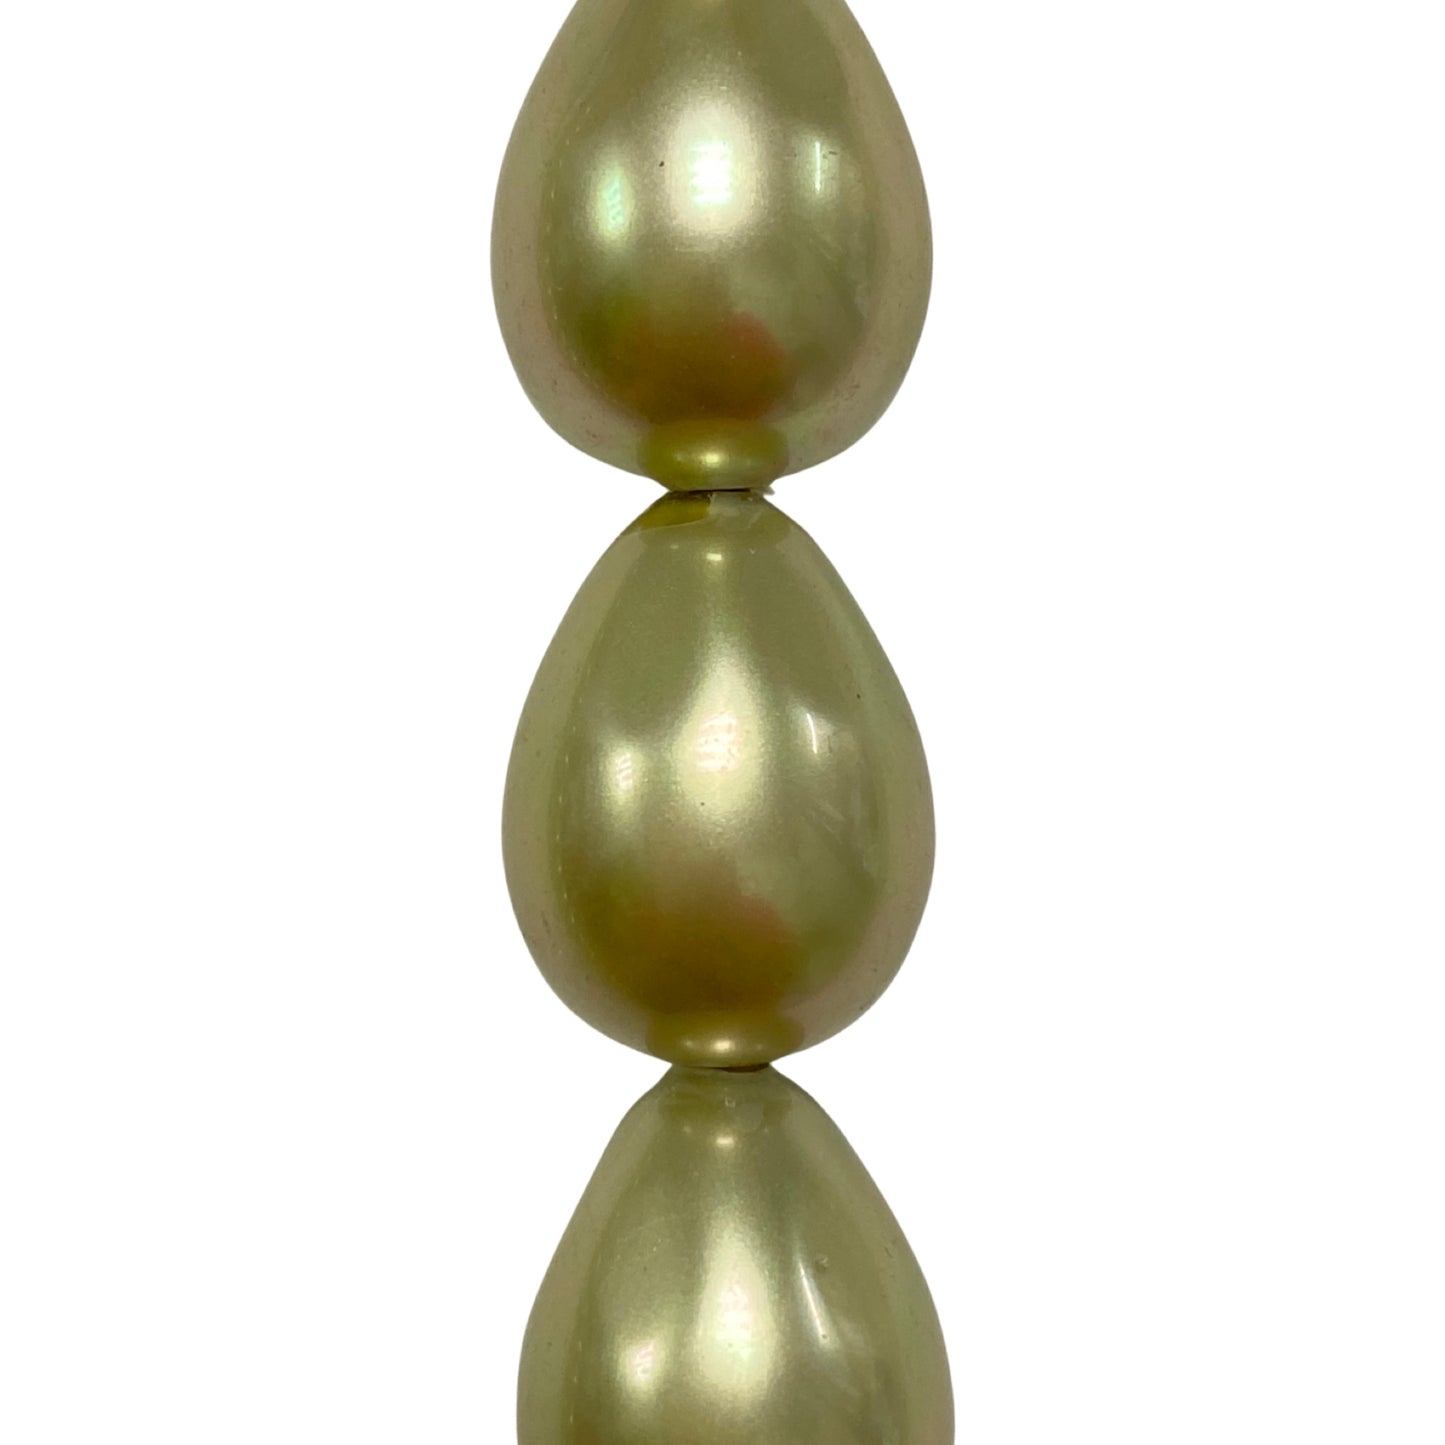 Olive Mother of Pearl - (Polished) - Teardrop/ Smooth